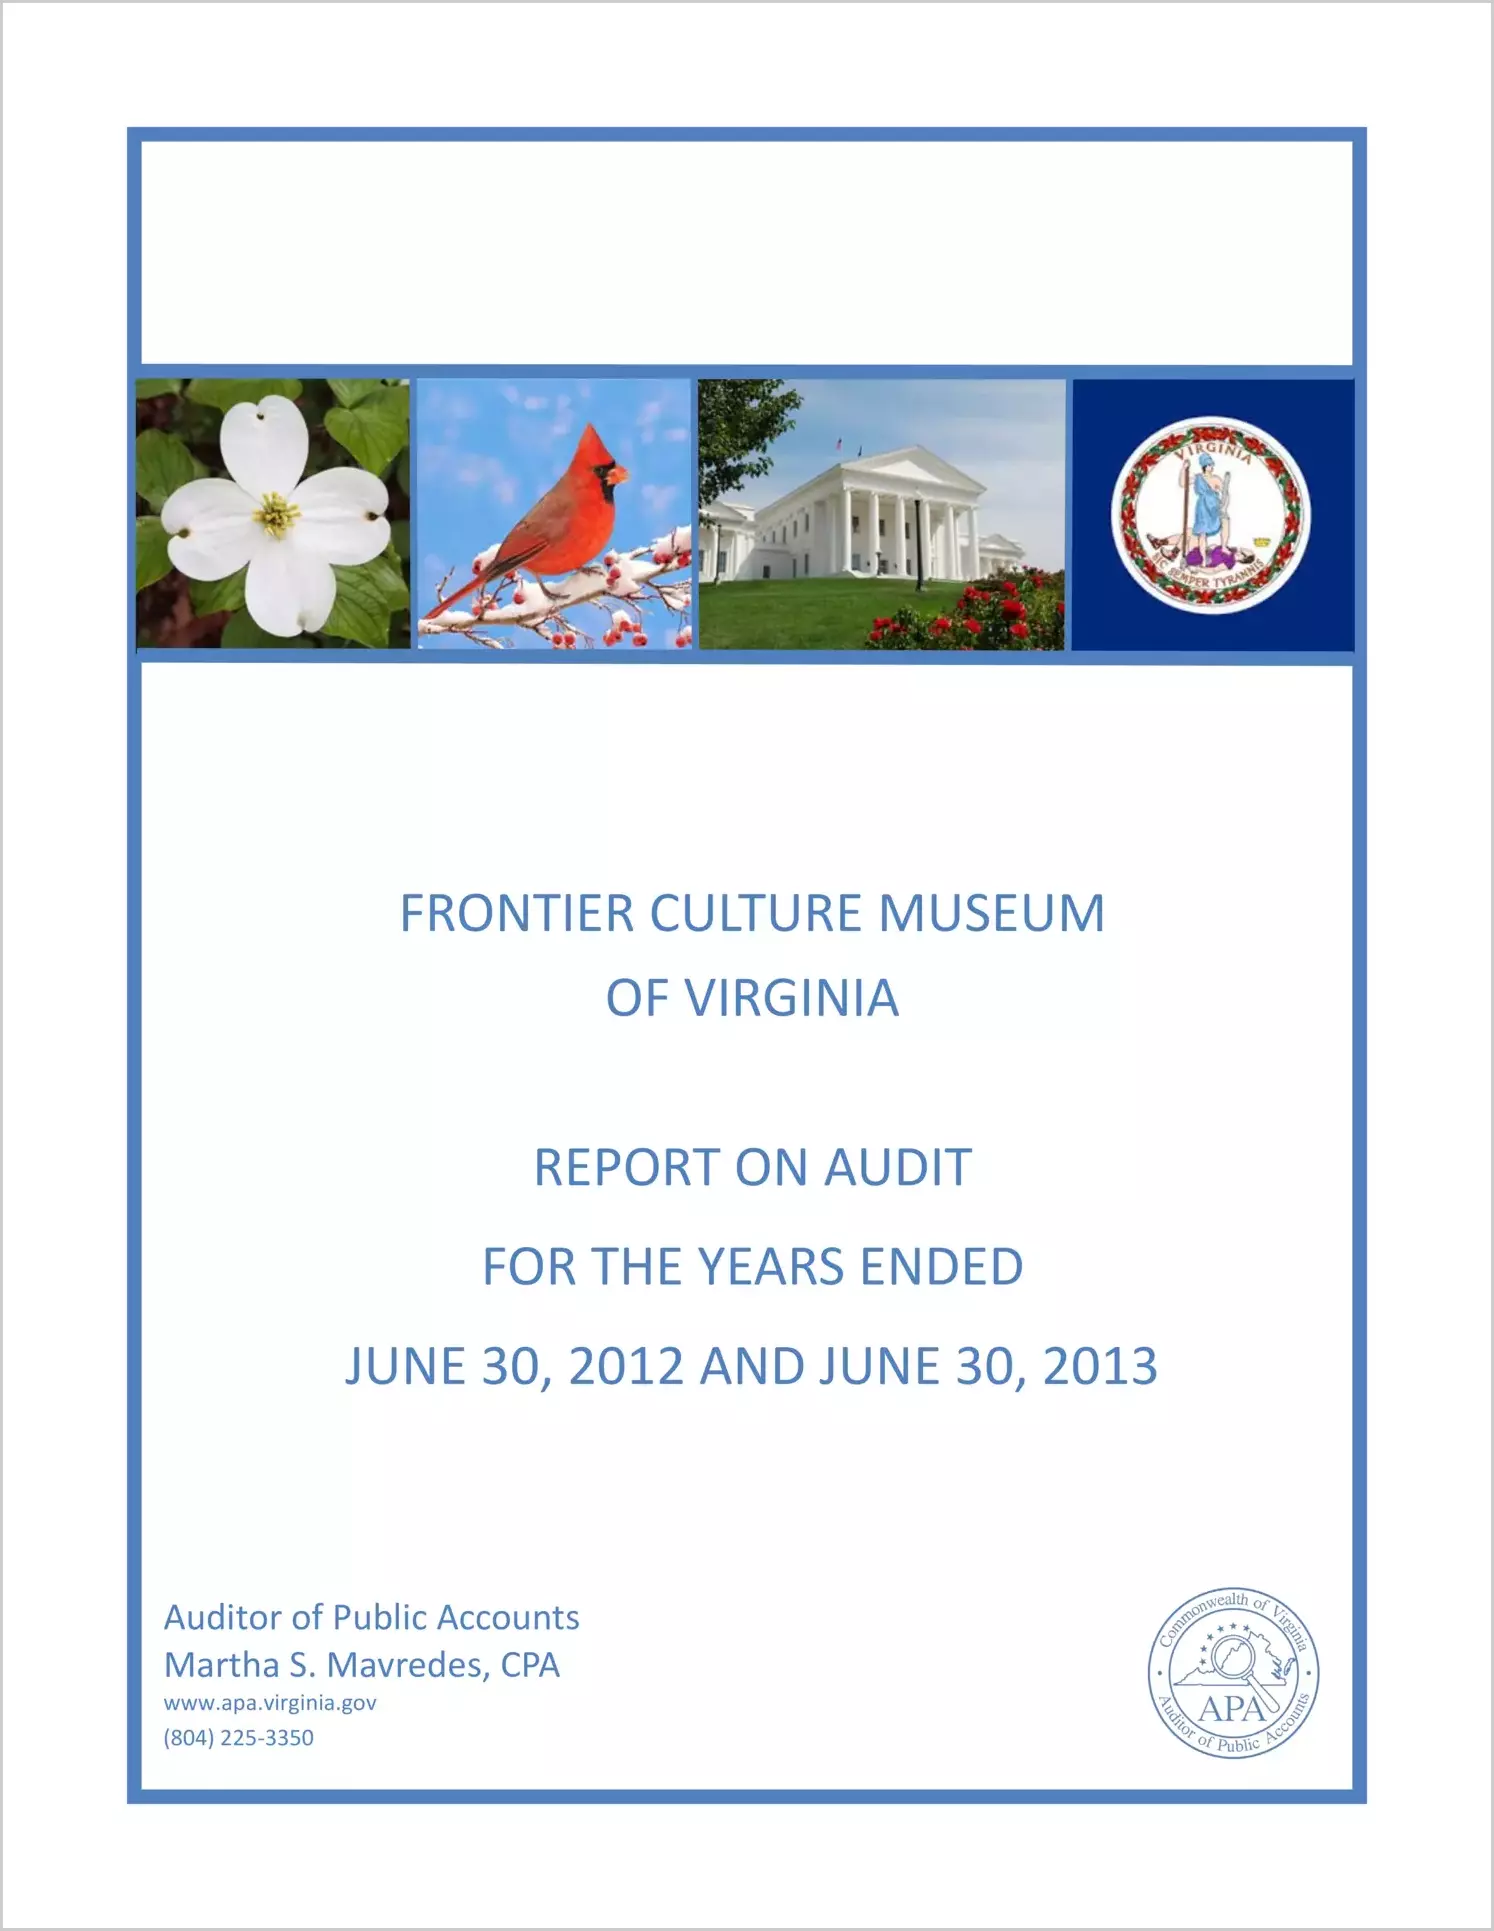 Frontier Culture Museum of Virginia for the years ended June 30, 2012 and June 30, 2013